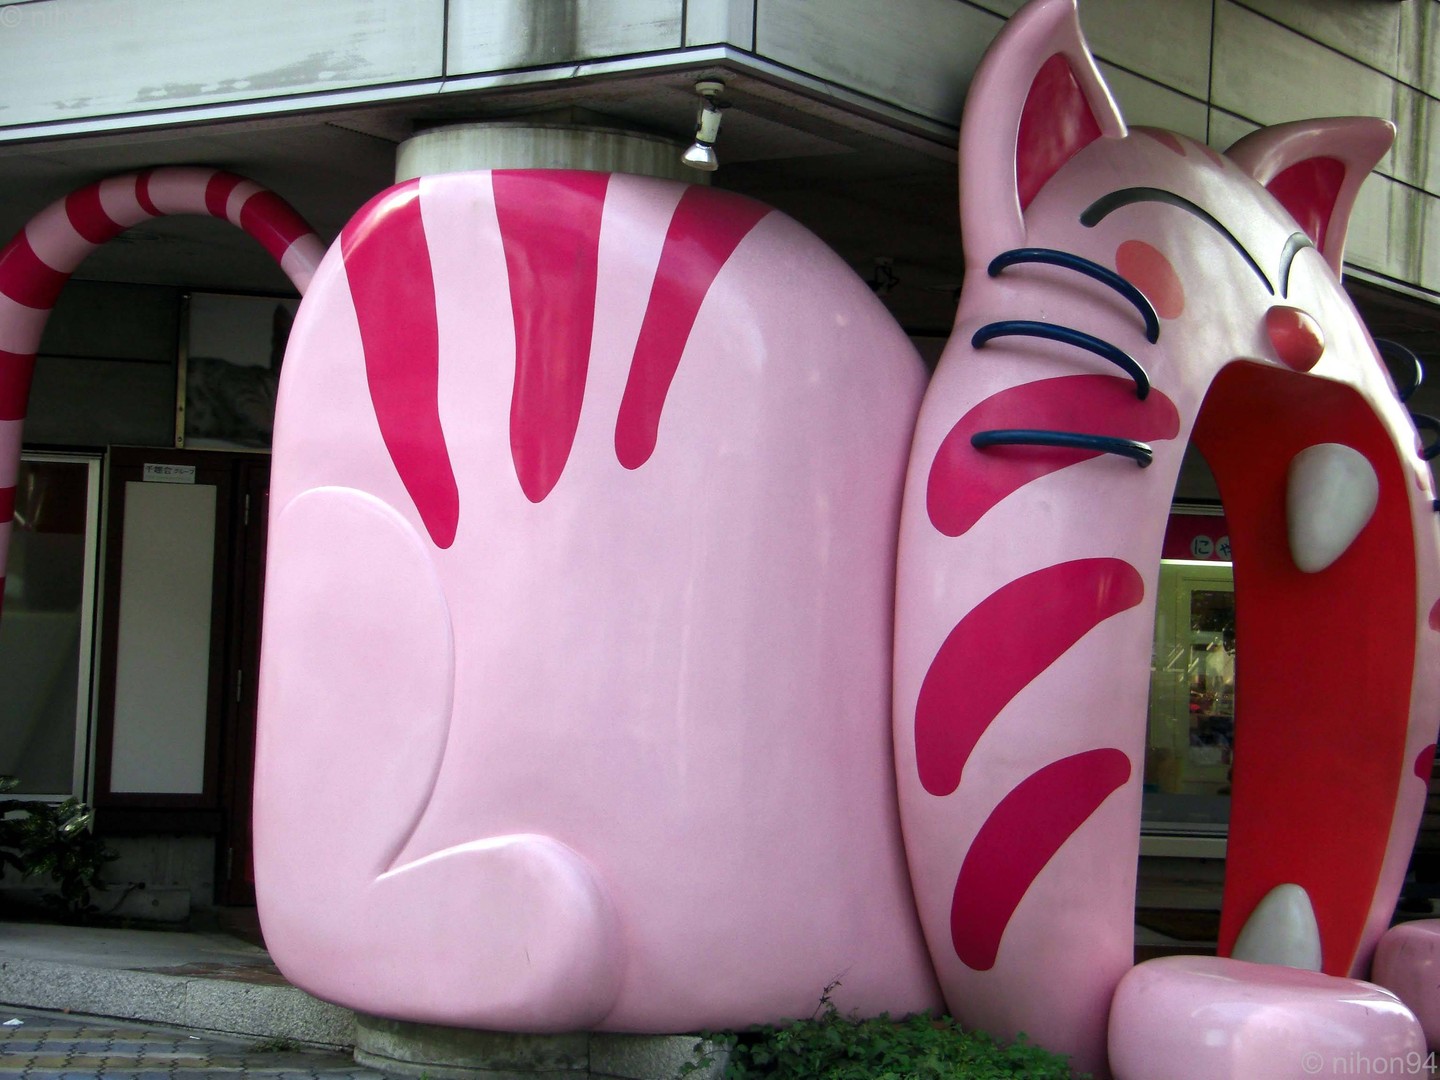 The Giant Cat in Japan